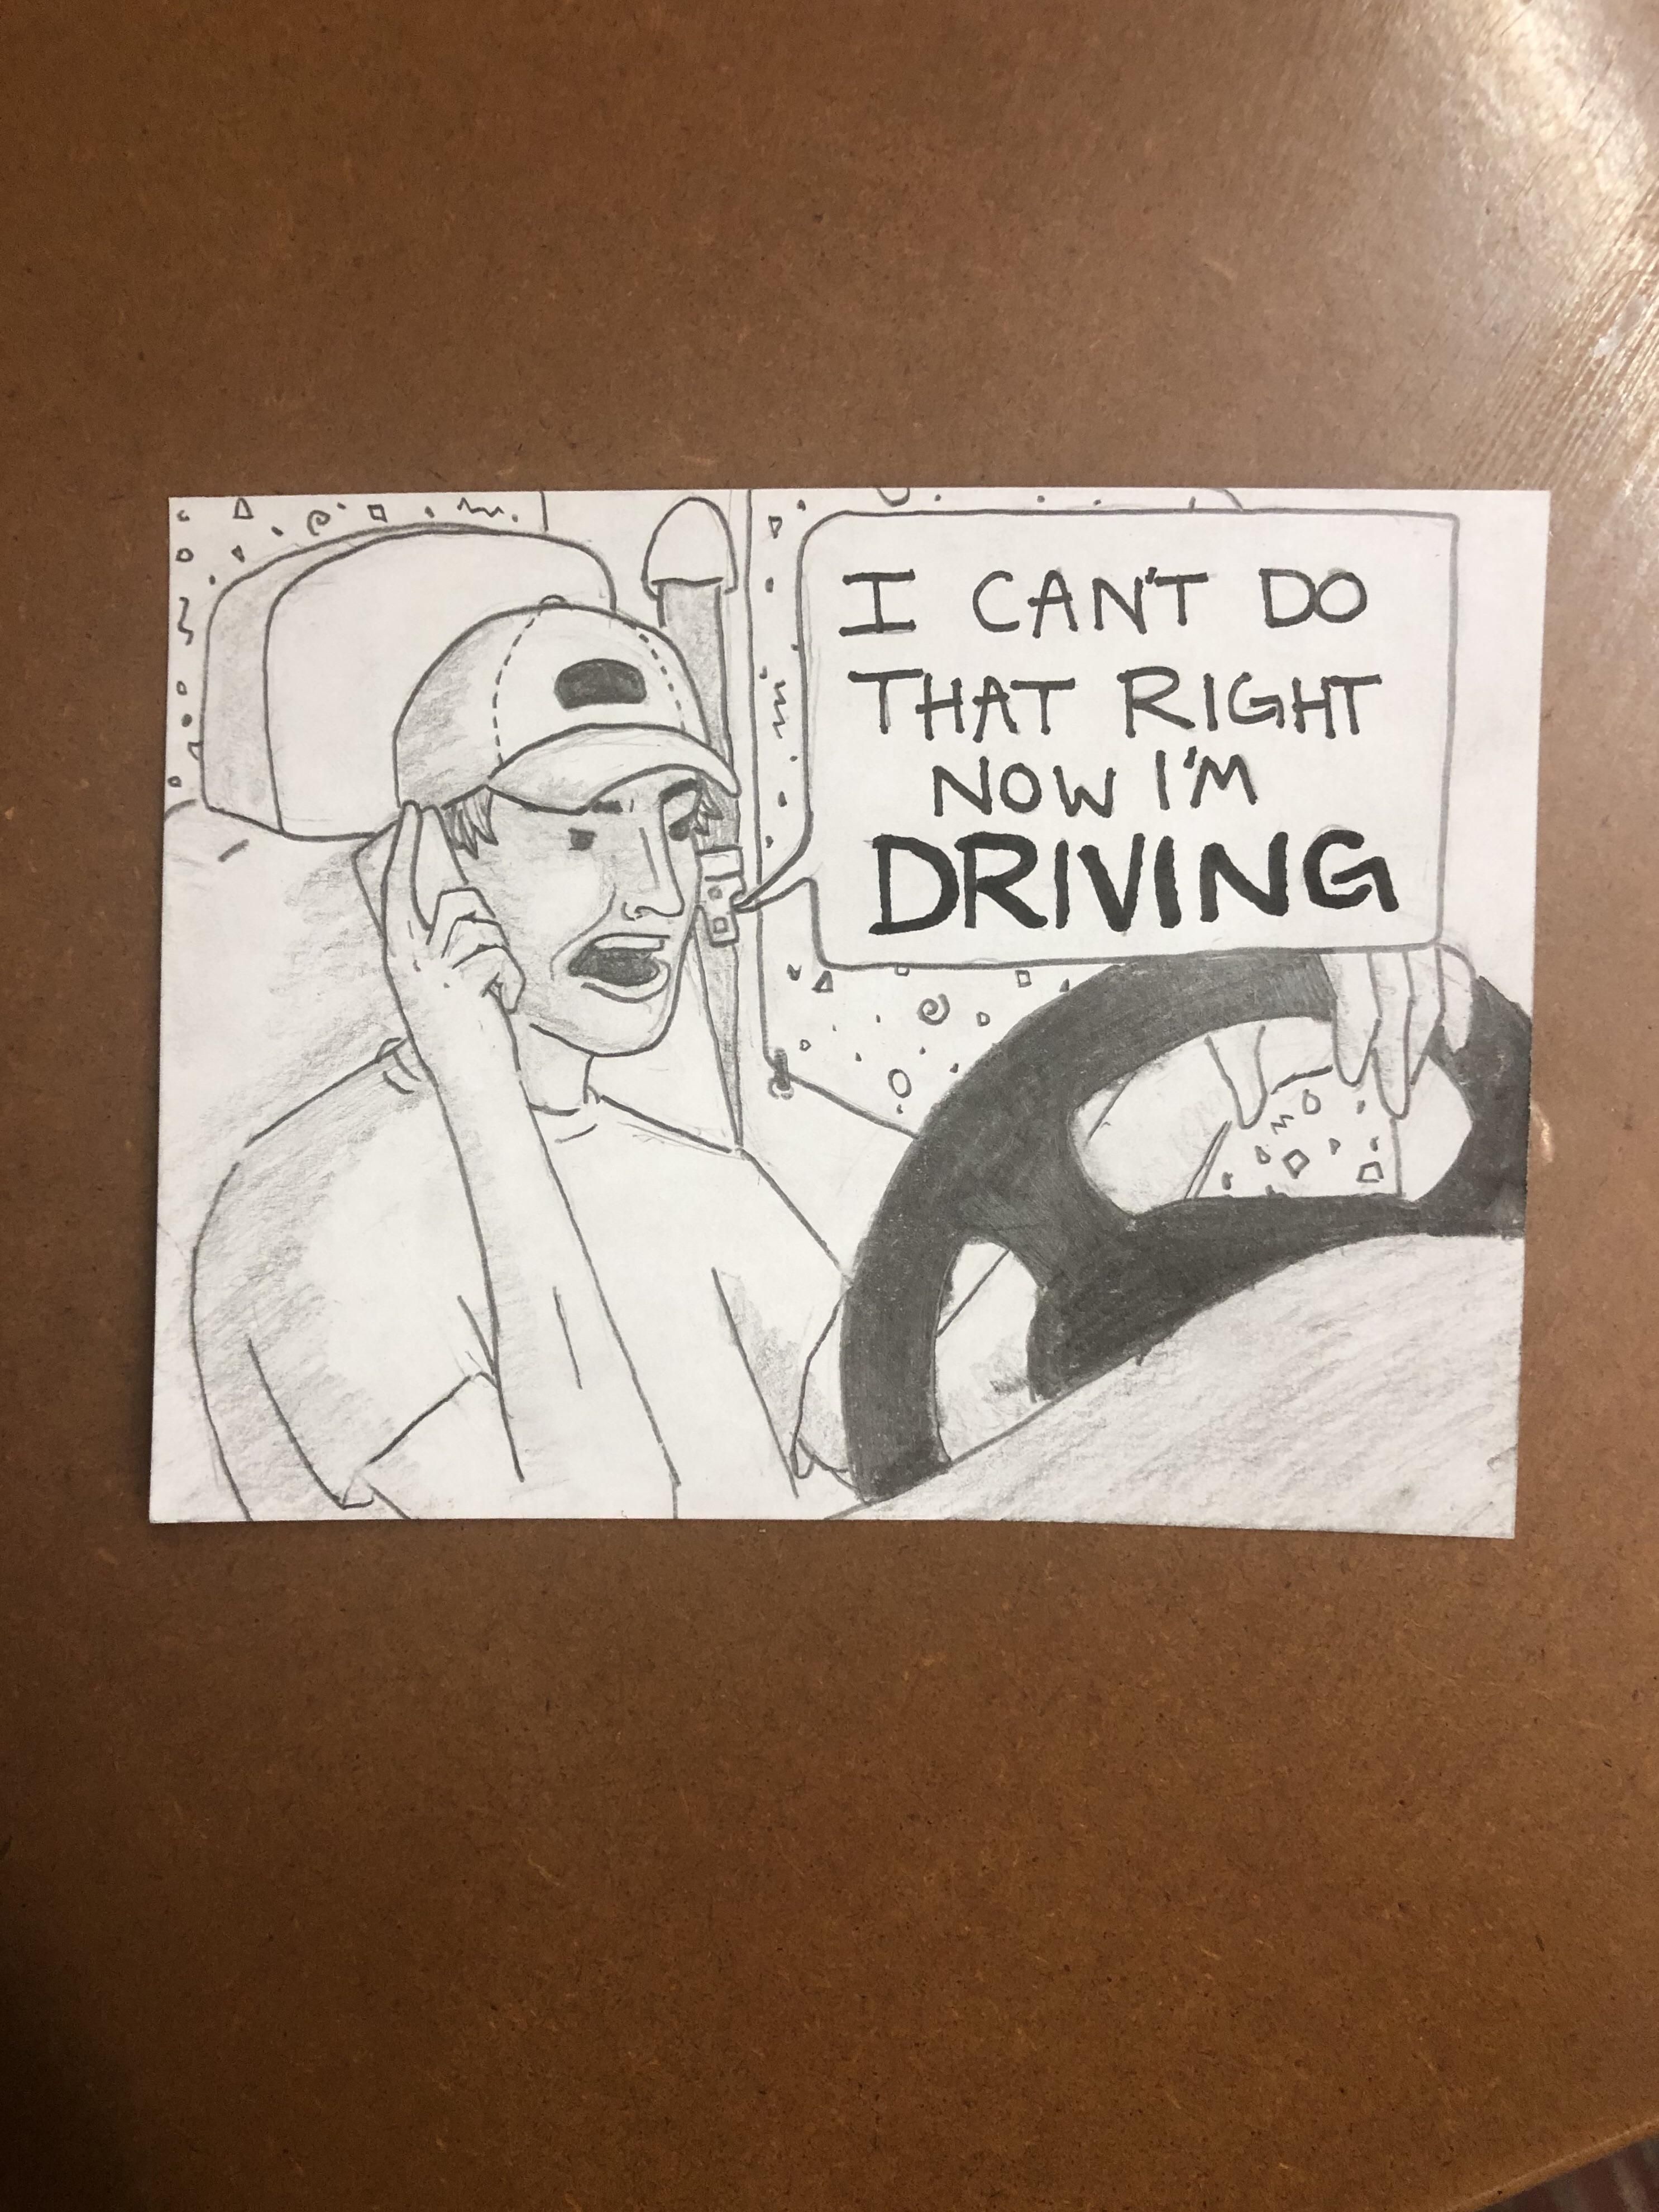 I work at a call center. Sometimes, I like to draw rude callers. Shoutout to all the people that call me while driving and act inconvenienced when asked for anything